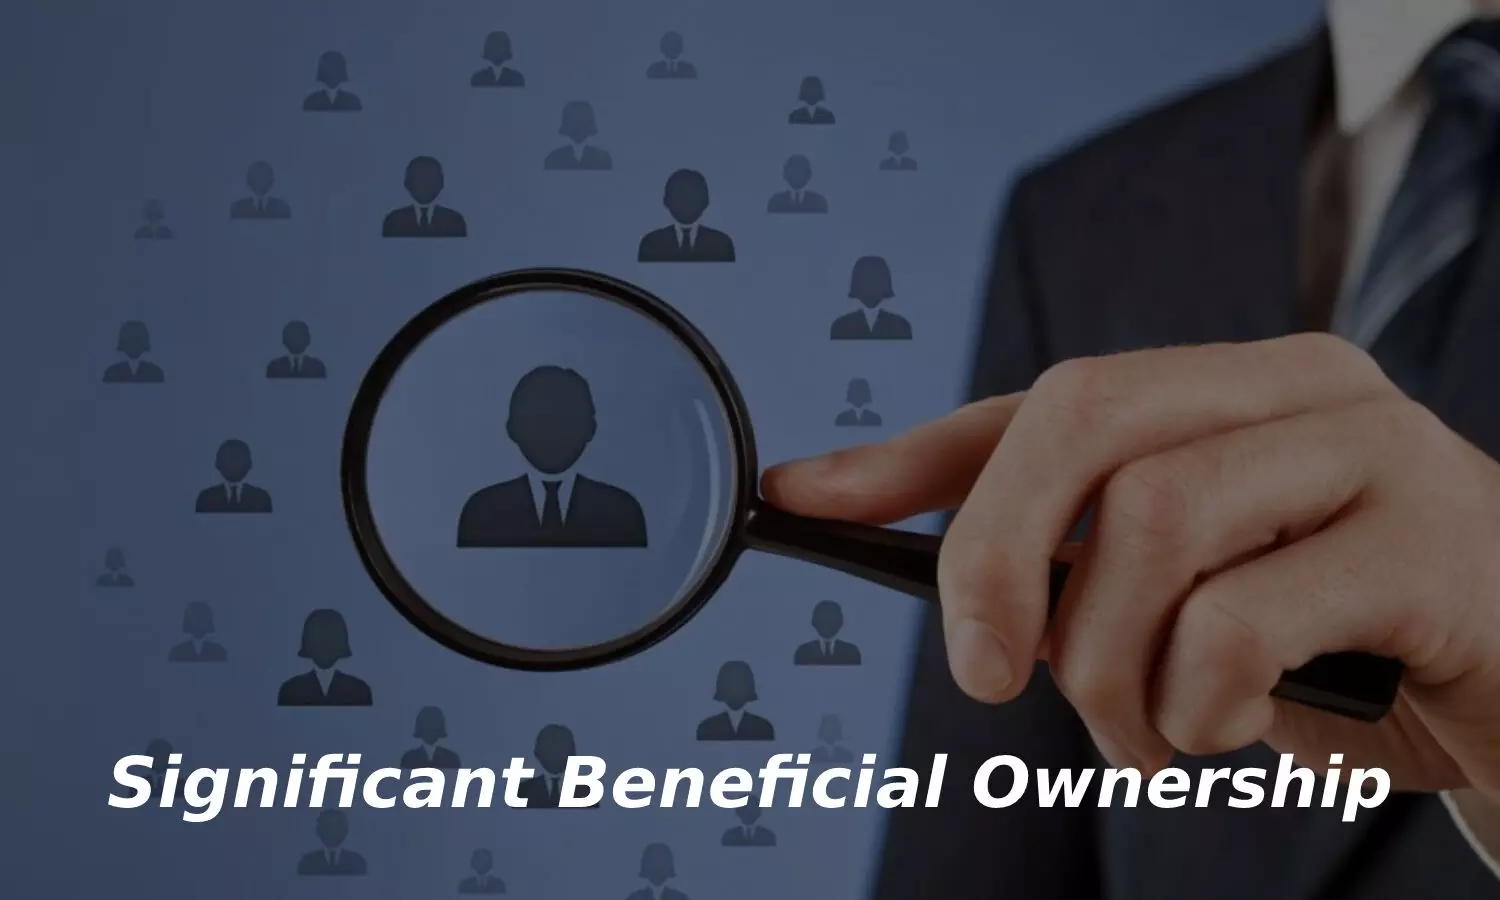 What Do You Mean By Significant Beneficial Ownership?